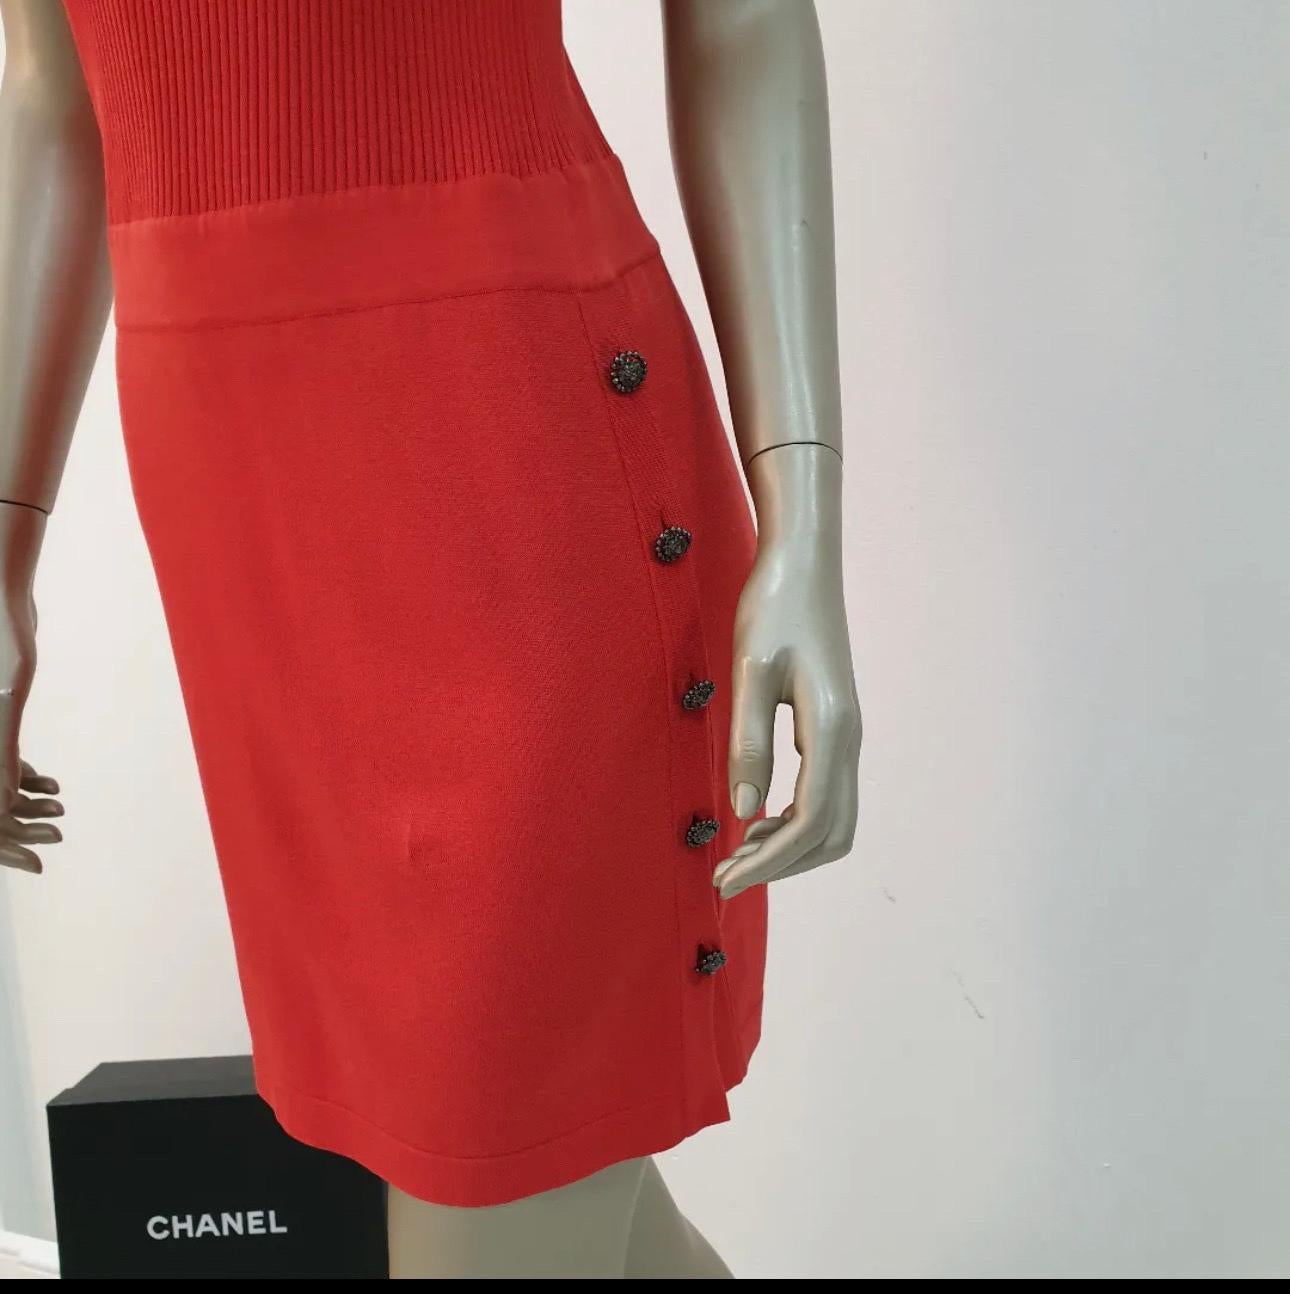 CHANEL Red Short Sleeve Dress In Good Condition For Sale In Krakow, PL